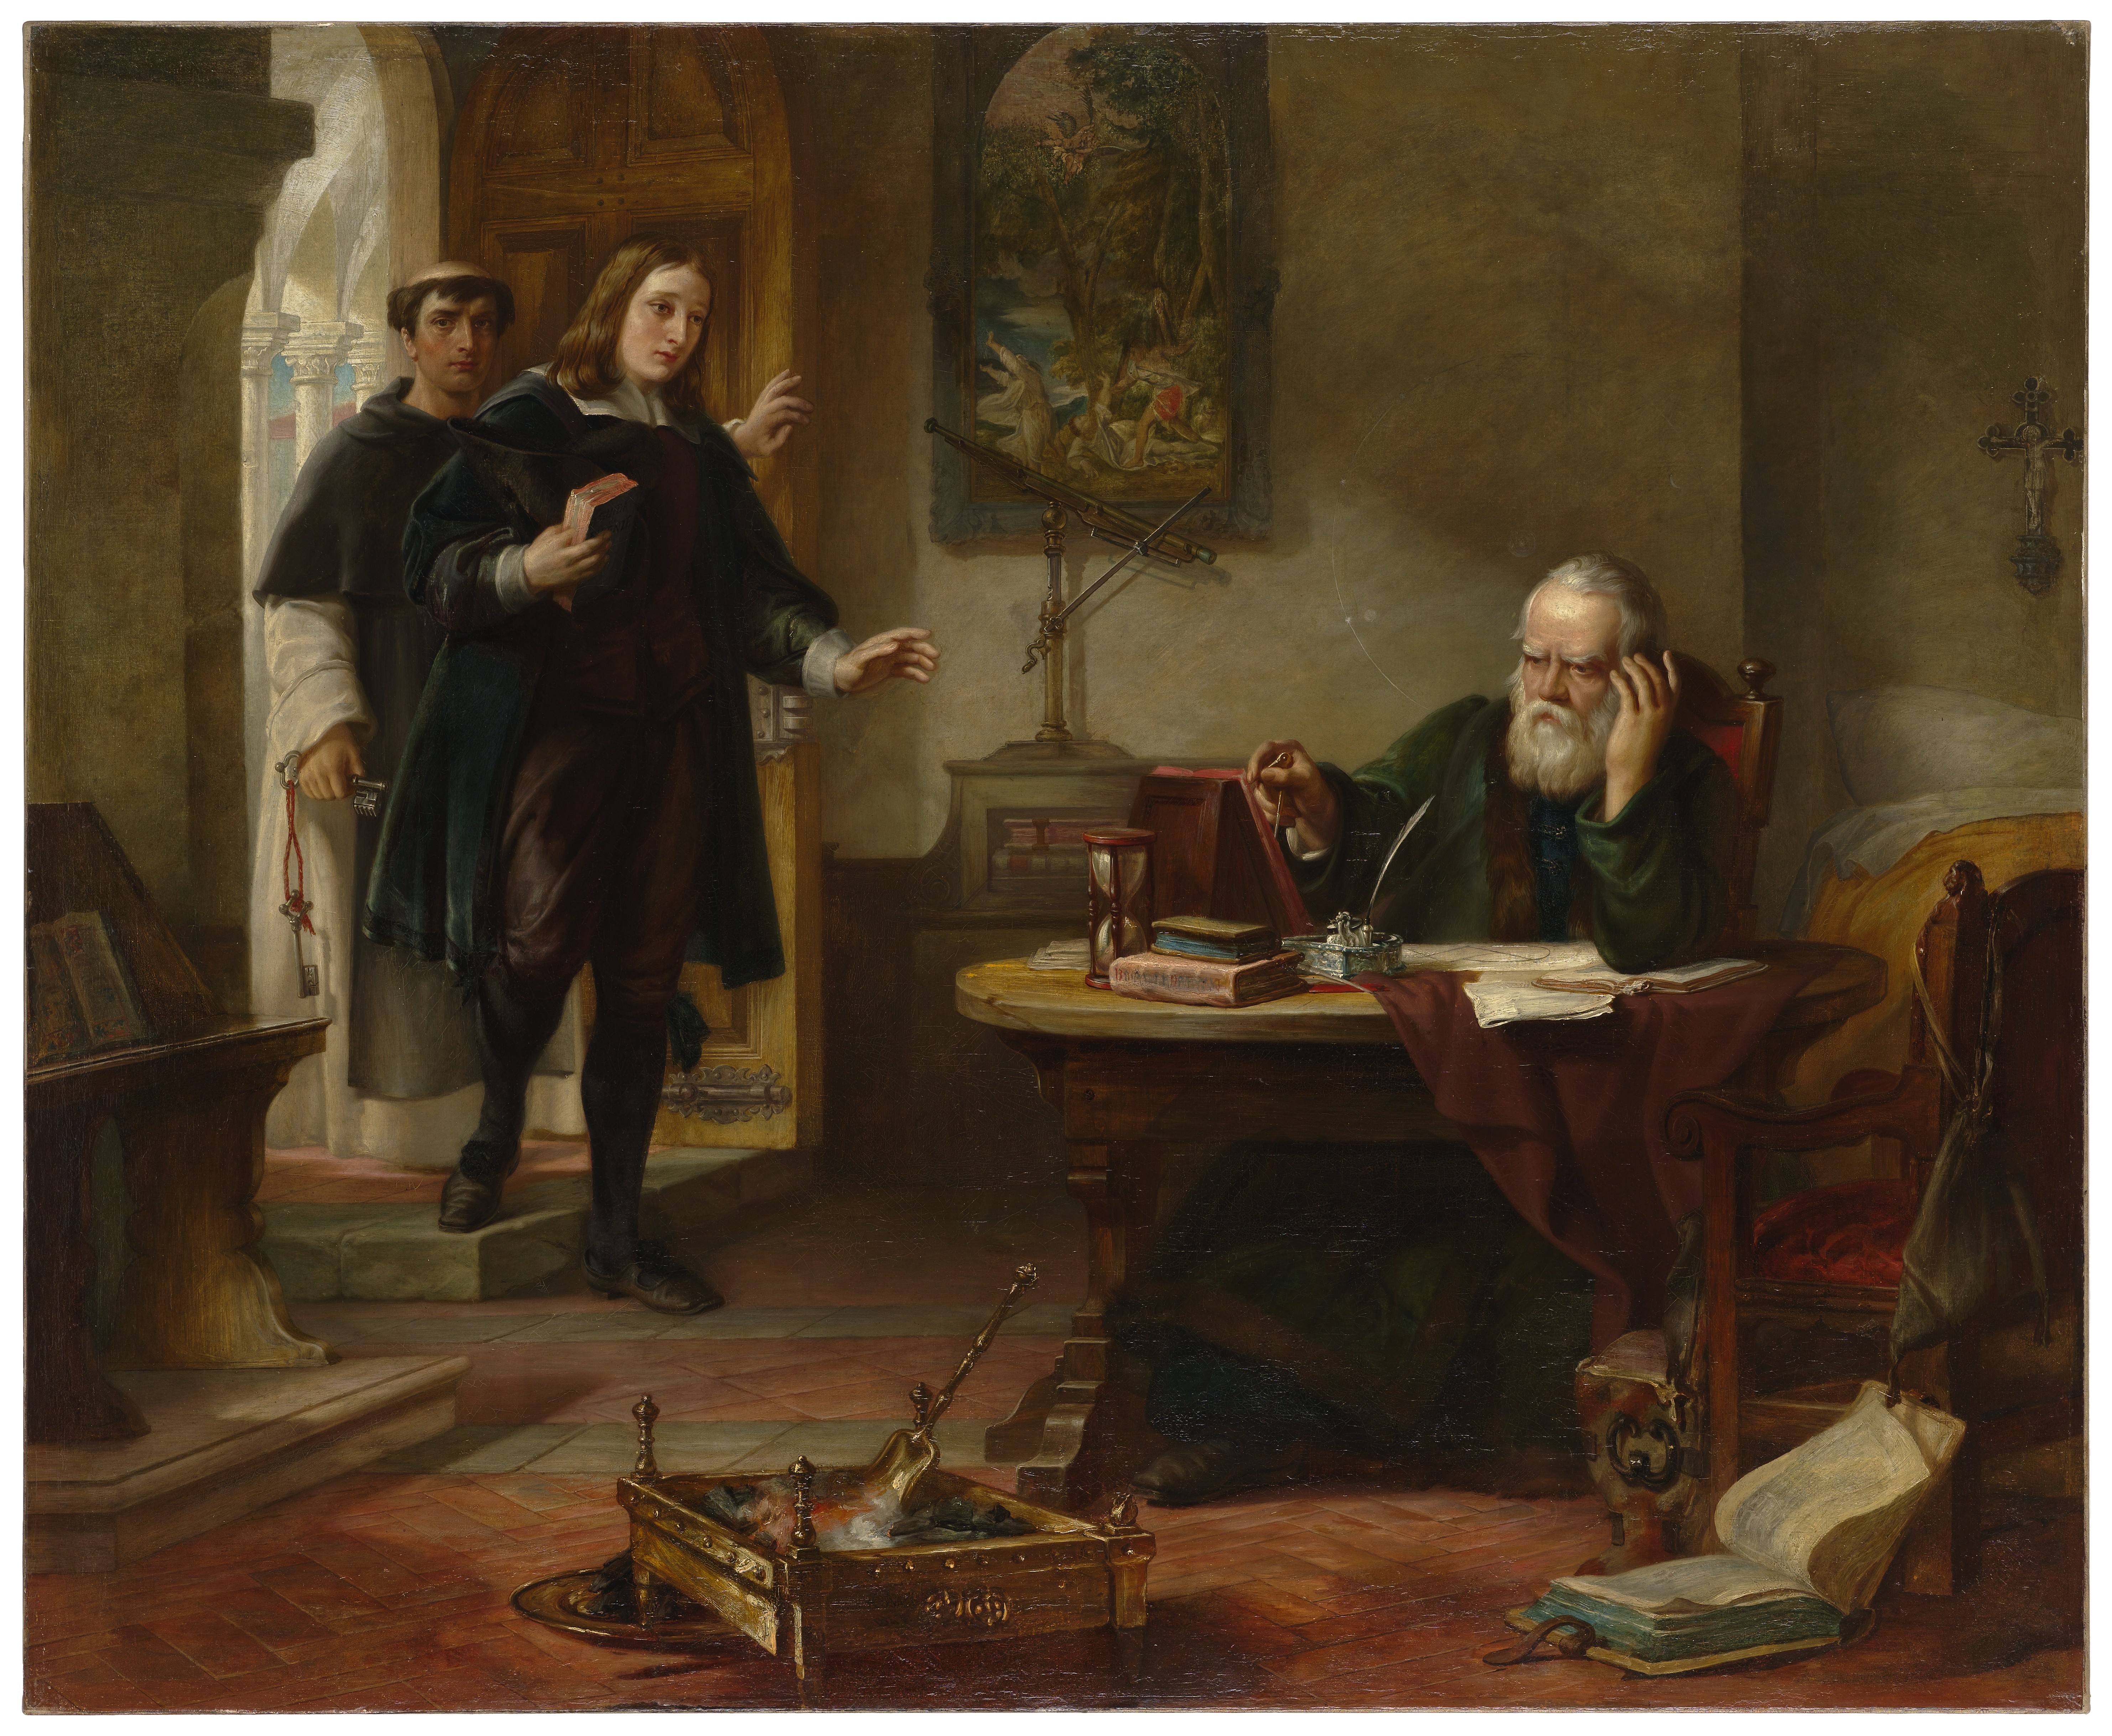 Milton and Galileo: Affinities between art and science - Making